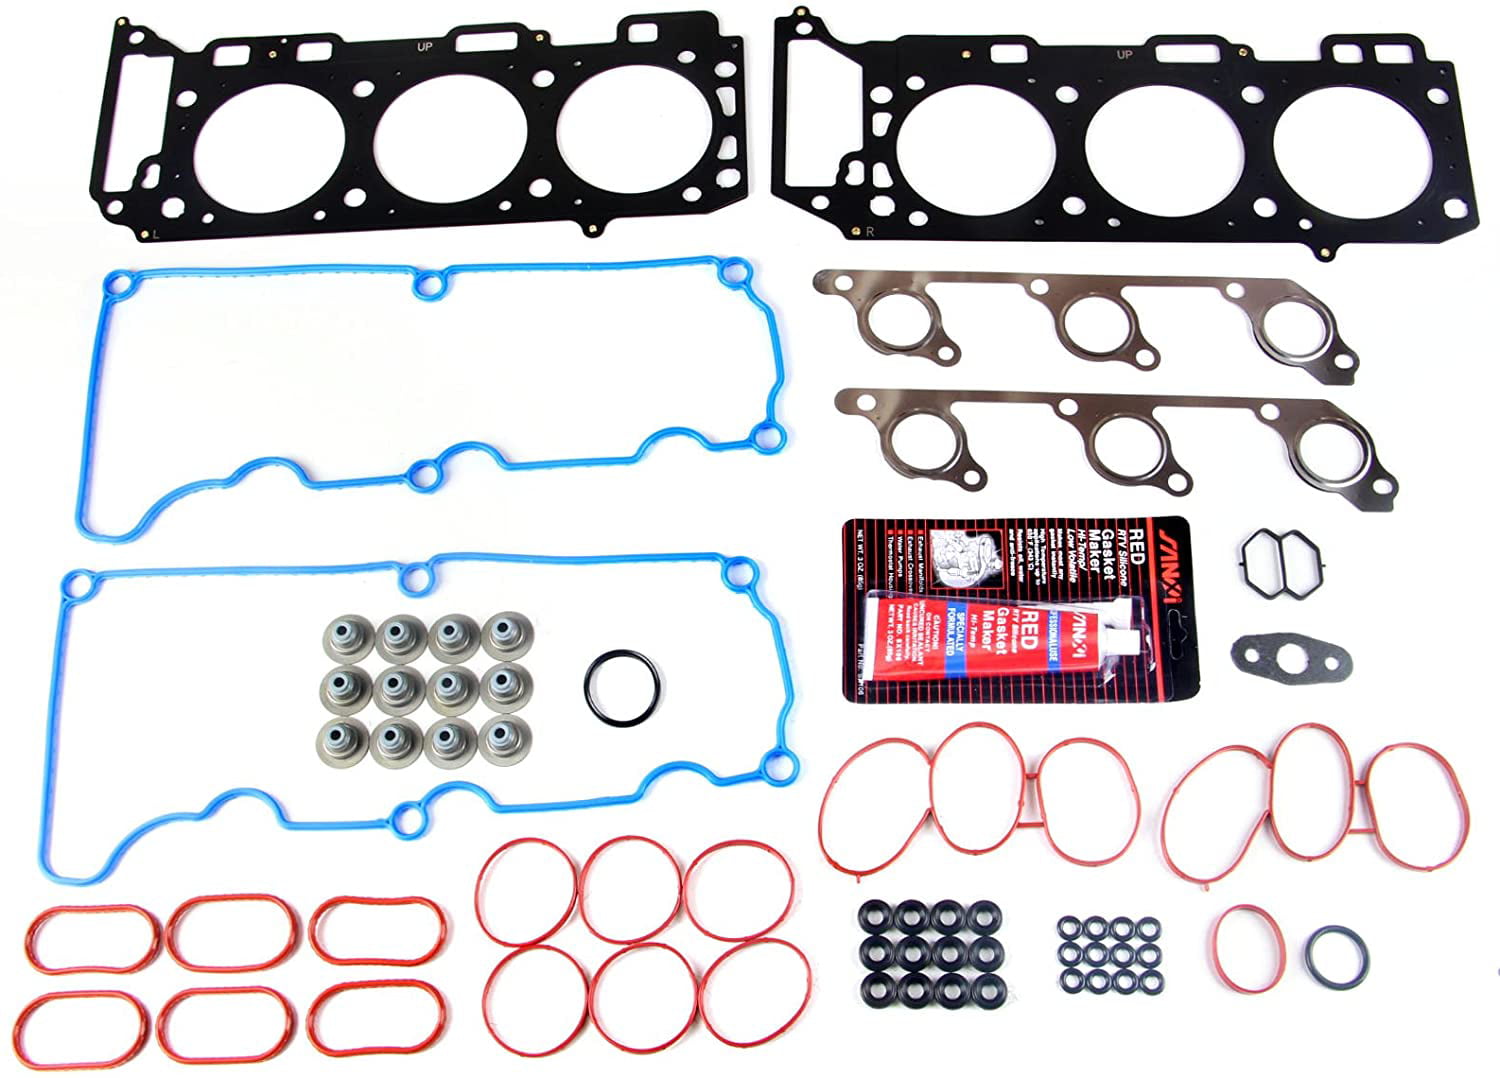 fit 2000-2011 Mercury Mazda B4000 Land Ford Ranger 4.0L V6 SOHC Engine Intake Manifold gaskets Automotive Replacement Gasket Sets SCITOO Compatible with Intake Manifold Gasket Kit 